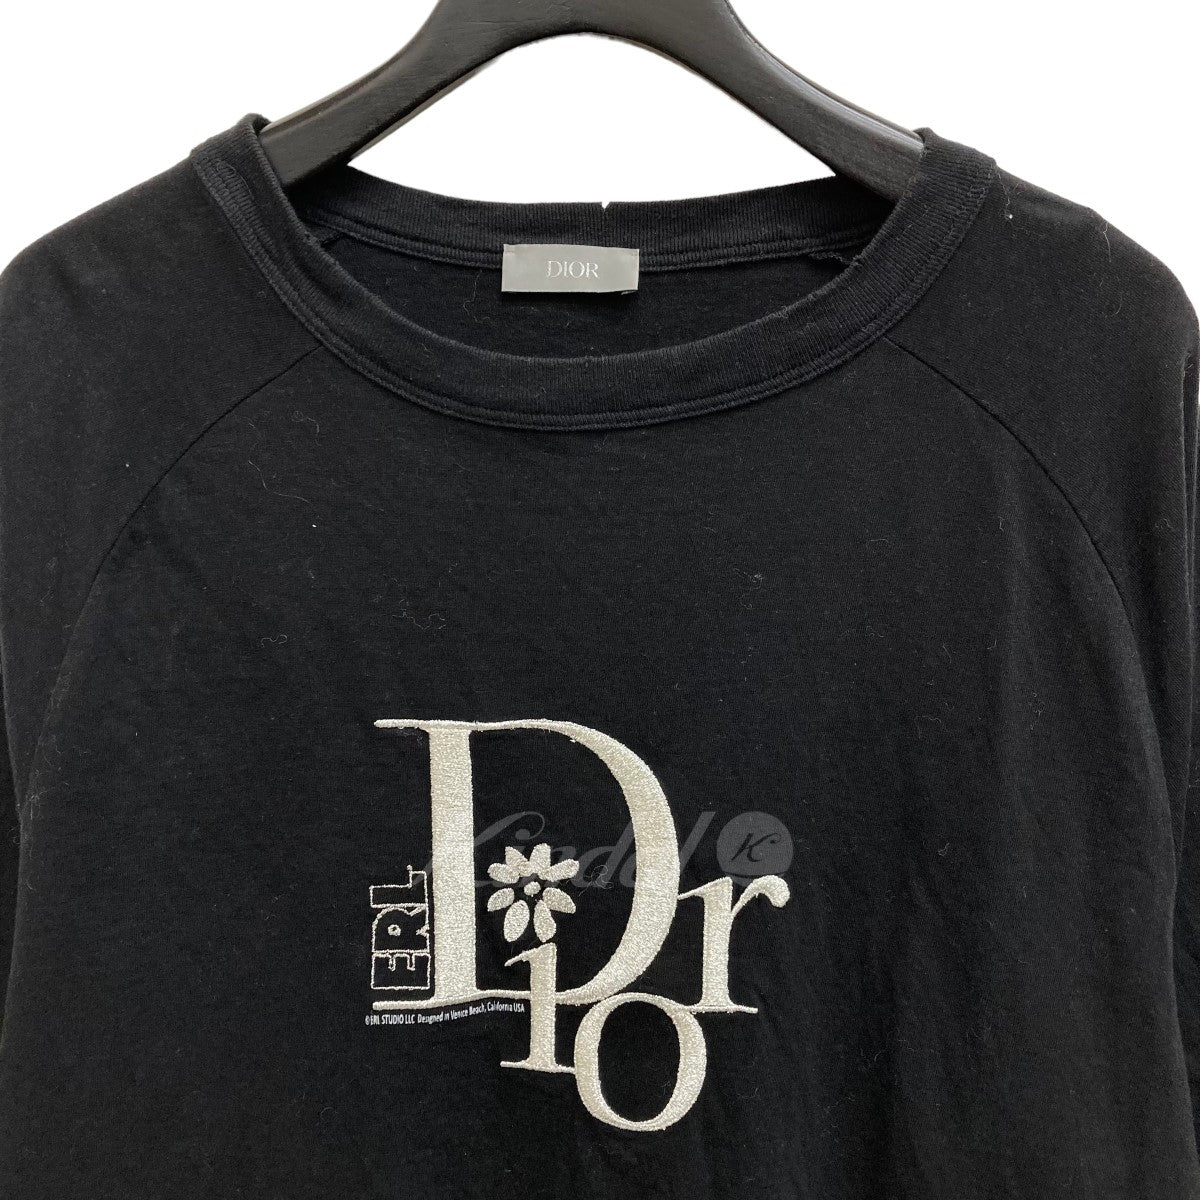 Dior(ディオール) ×ERL 23SS Relaxed Fit Tee 半袖Tシャツ ...